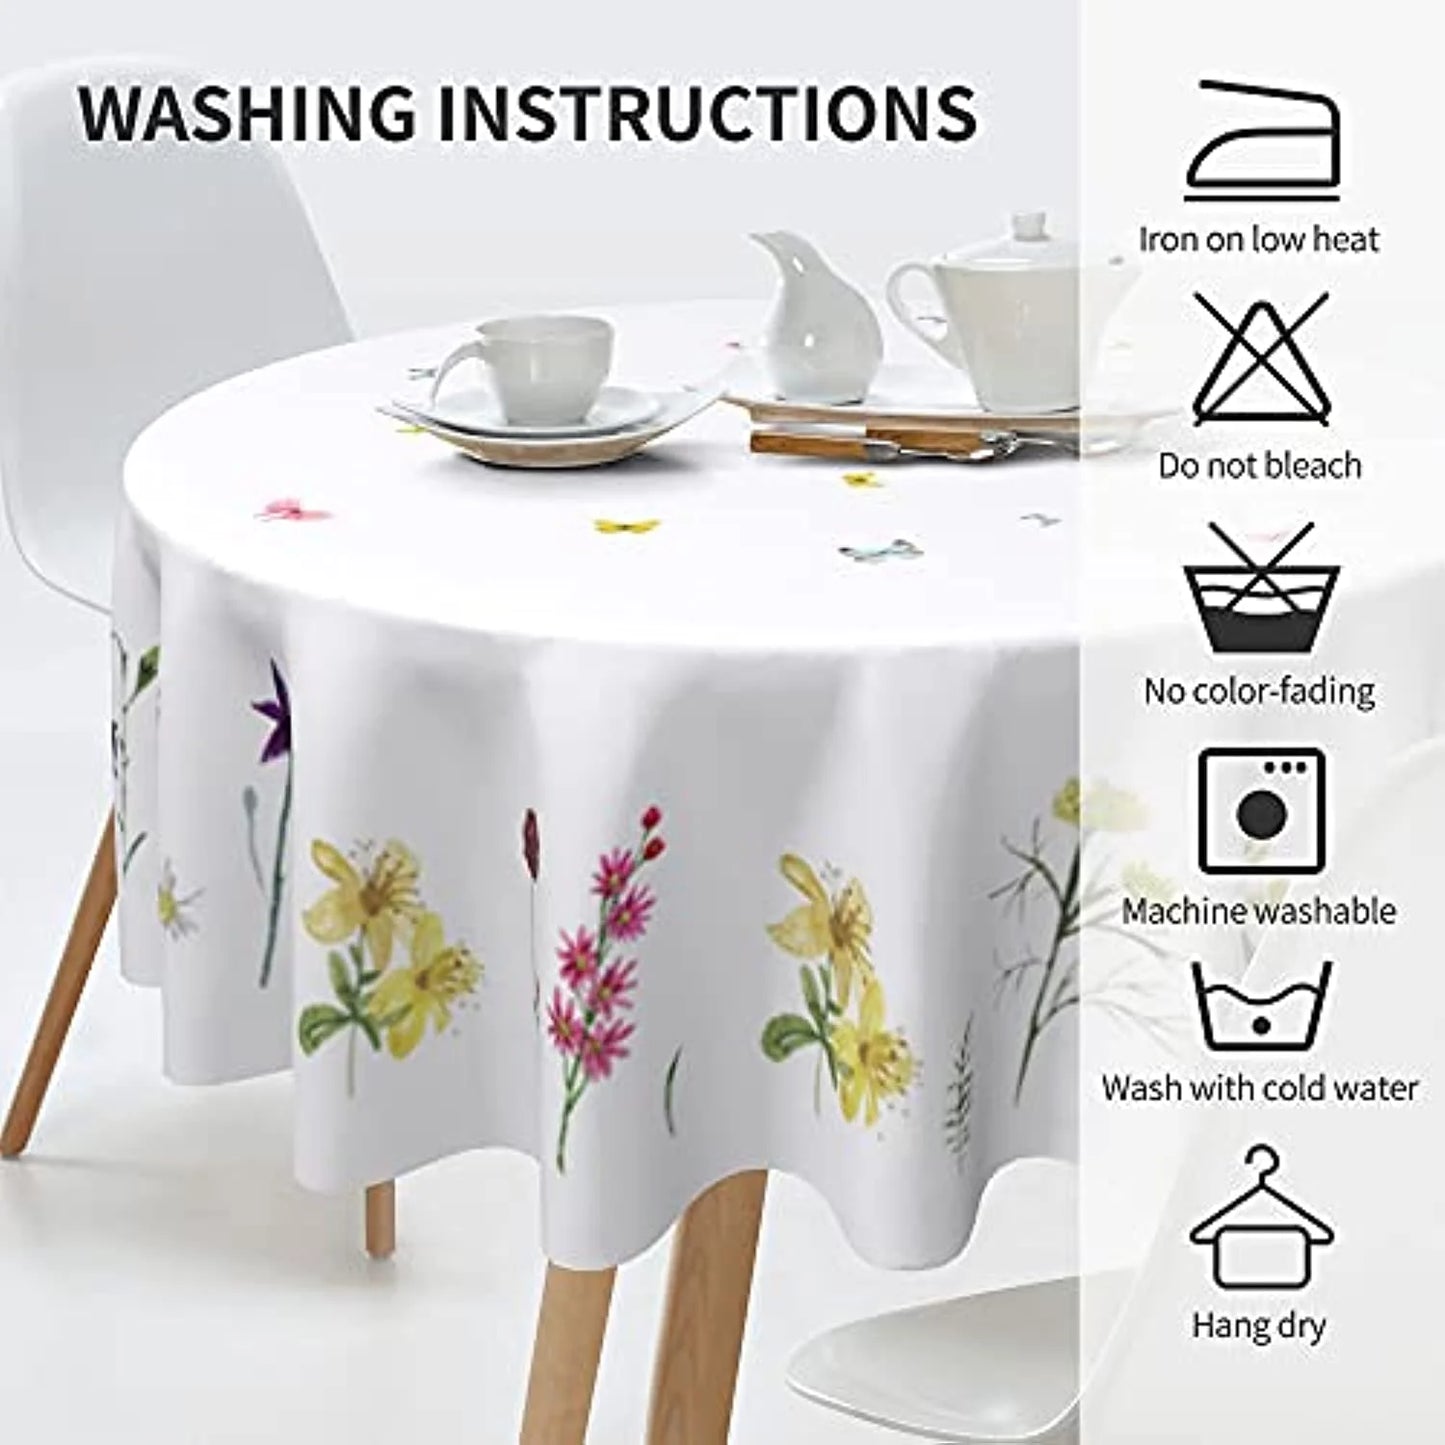 Wnoesat Round Floral Tablecloth  Butterfly Round Tablecloth 60 Inch Watercolor Floral Table Cloth Waterproof Tablecloths for Round Tables Polyester Round Table Cover Protector for Dining Room Indoor Outdoor